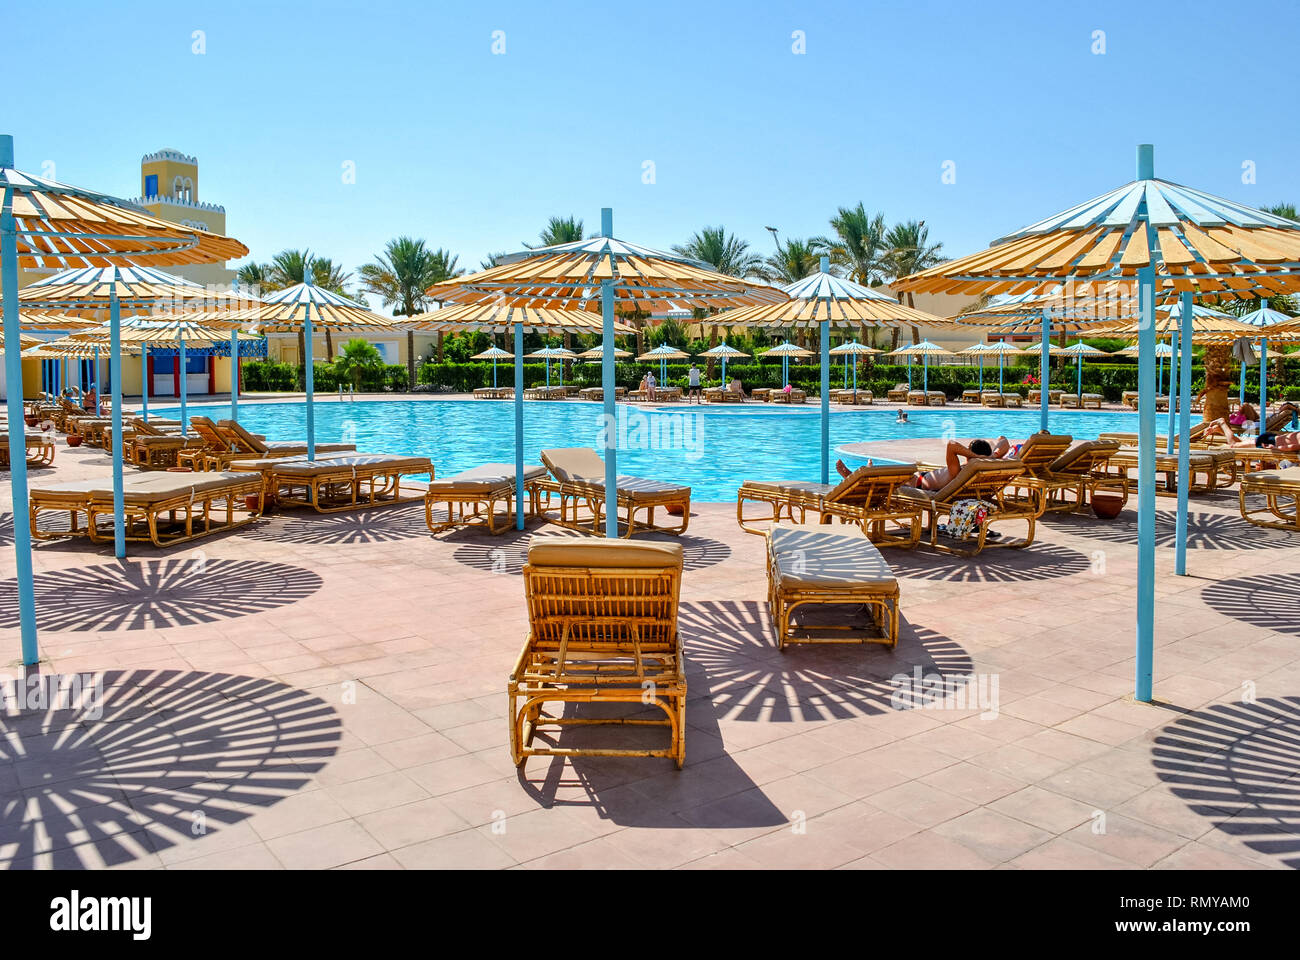 Loungers by the pool in the tourist resort town of Hurghada, Egypt Stock Photo